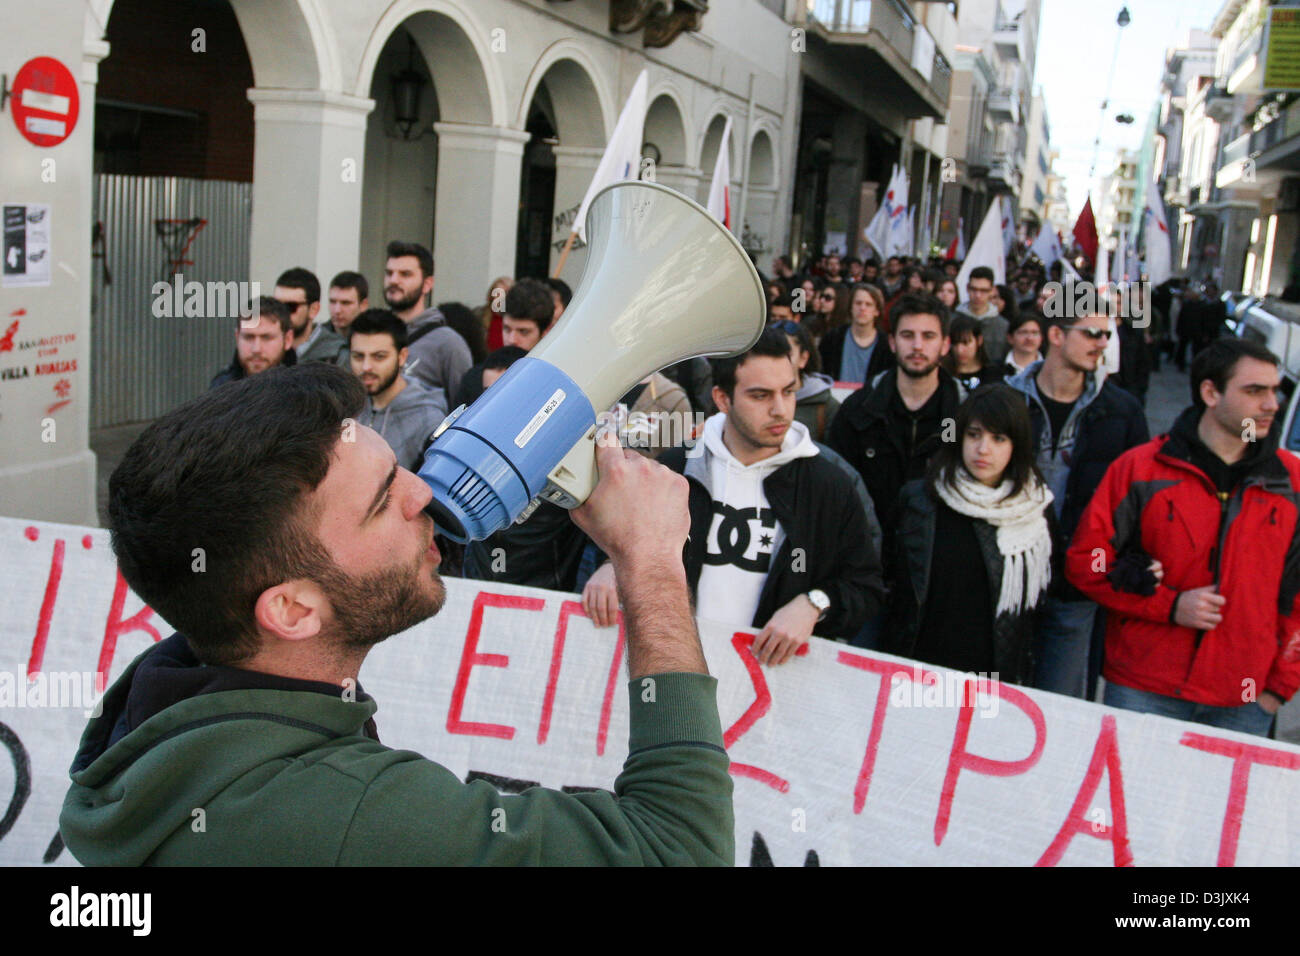 Patras, Greece. 20th February 2013.  Protesters shouting slogans and marching through the city of Patras, Greece during a 24 hour strike called by the trade union confederations of GSEE and ADEDY. Credit:  Art of Focus / Alamy Live News Stock Photo